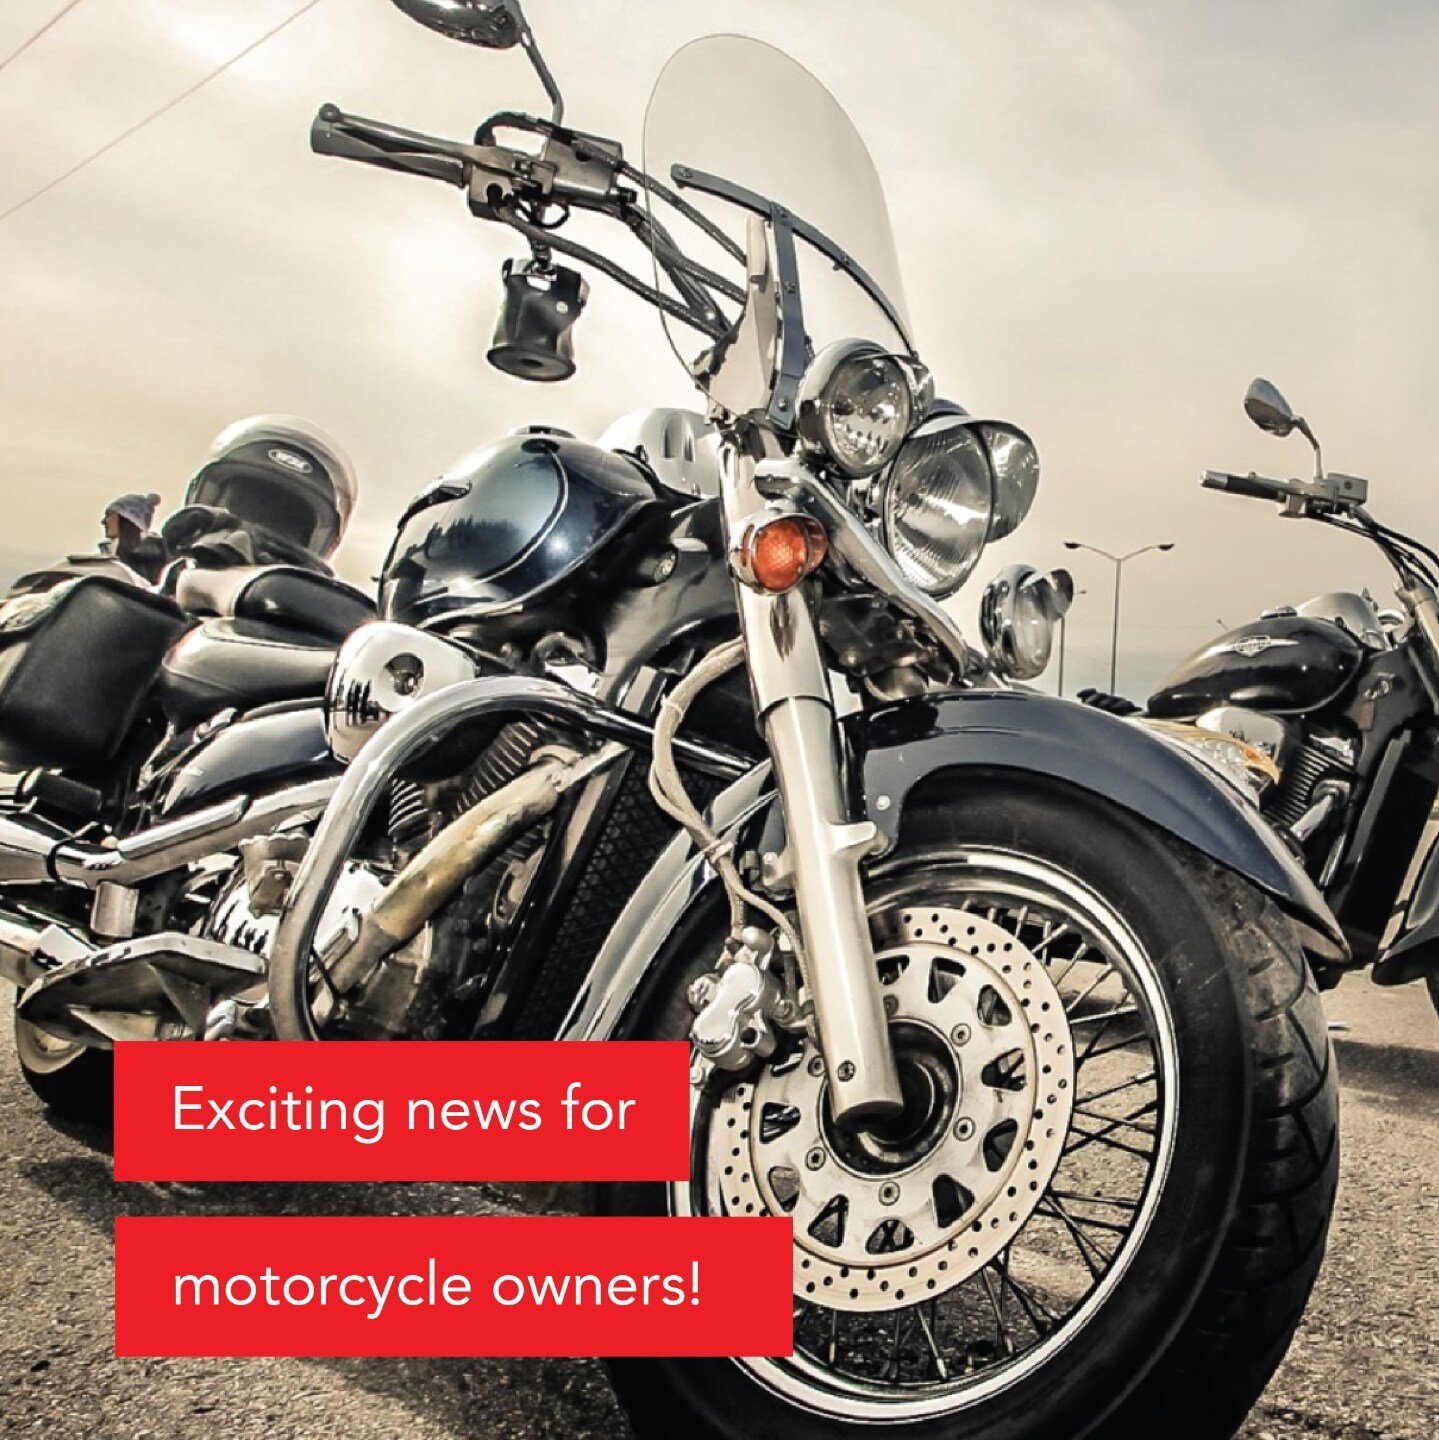 We're thrilled to announce that we now offer Warrant of Fitness (WOF) checks for motorcycles! 🏍️🔧 We're ready to ensure your ride is safe and roadworthy, book your motorcycle WOF check in today!